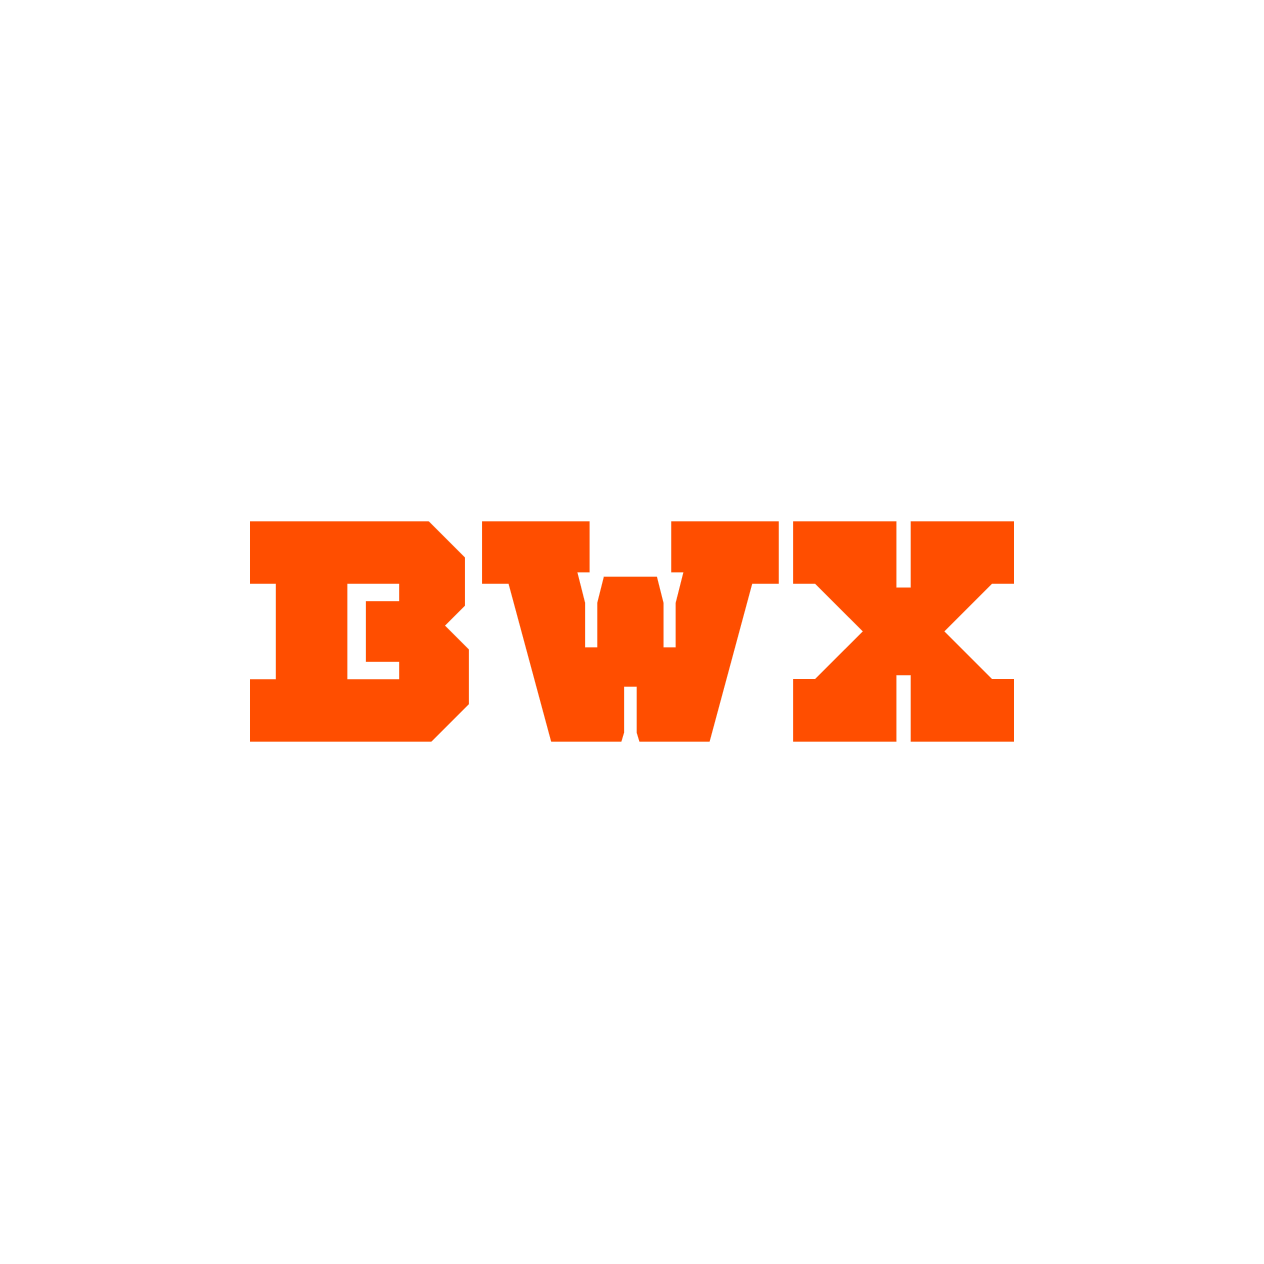 nelsoncouto-work-logos-beerworks-v2